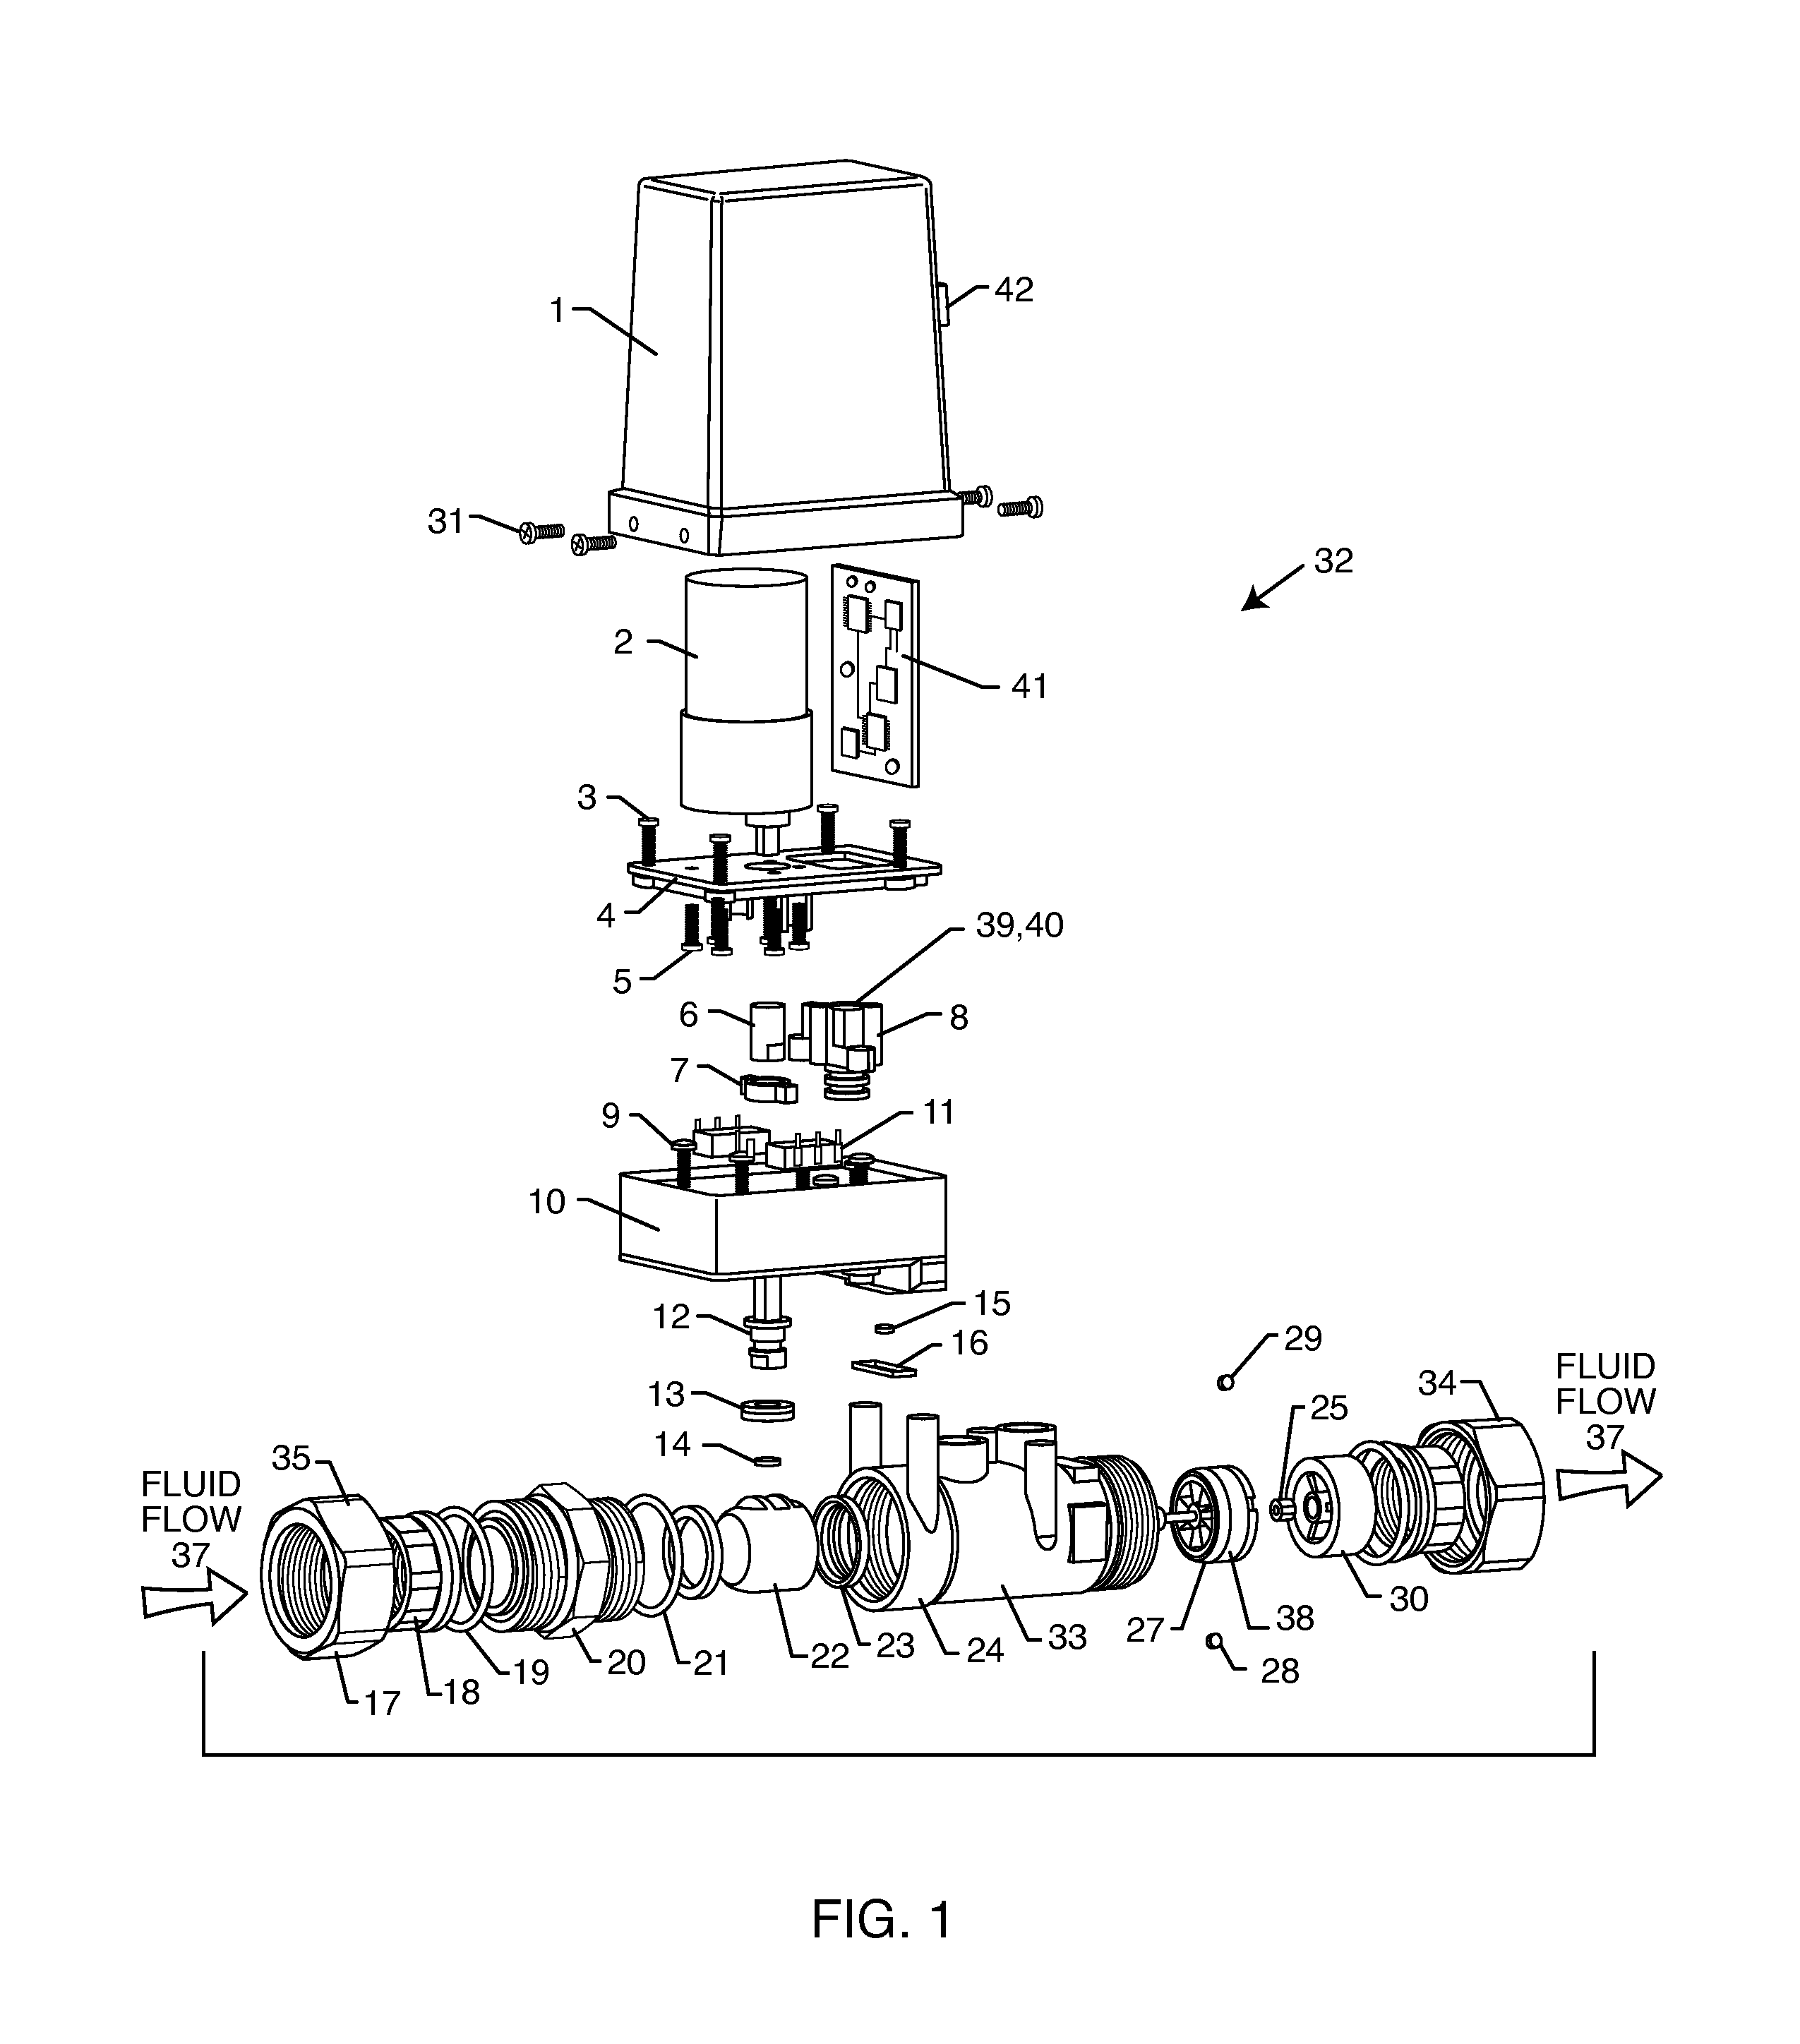 Fluid monitoring and control system